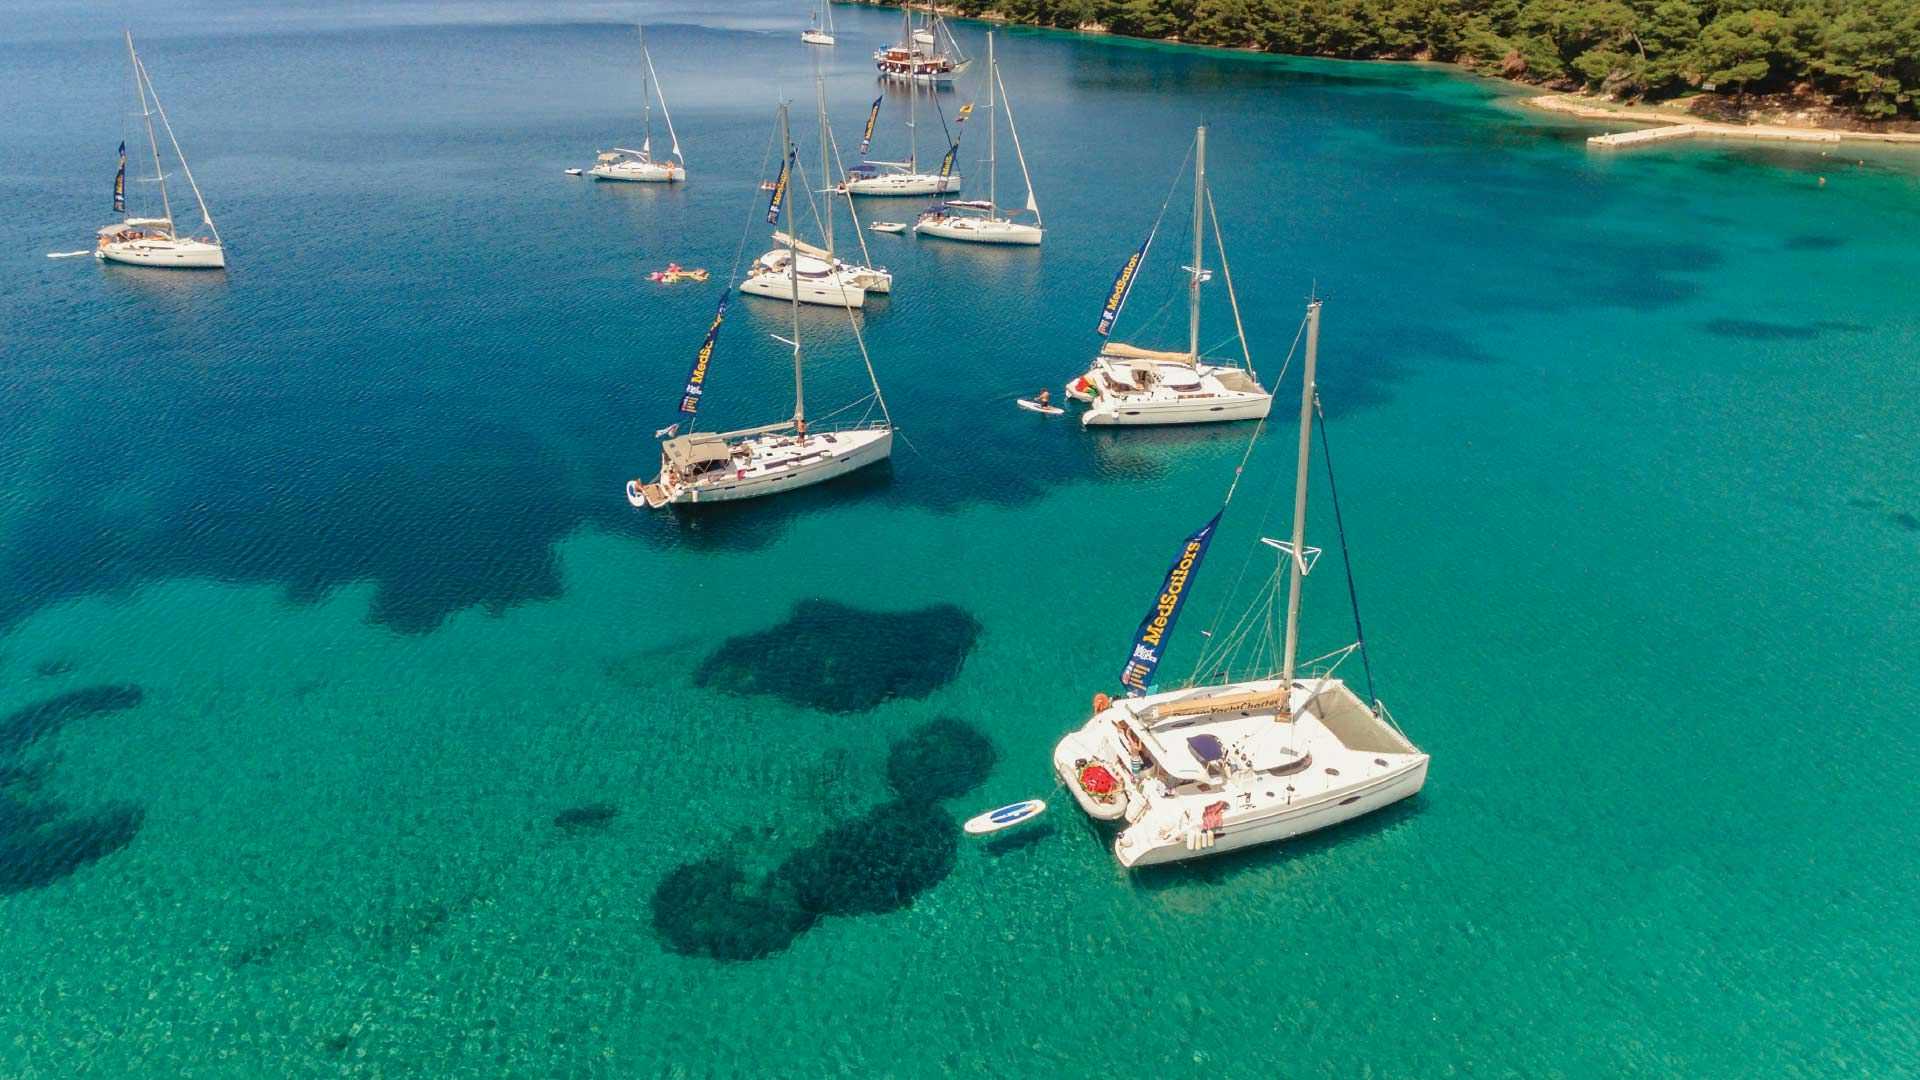 MedSailors yachts rafted together in a bay in Croatia